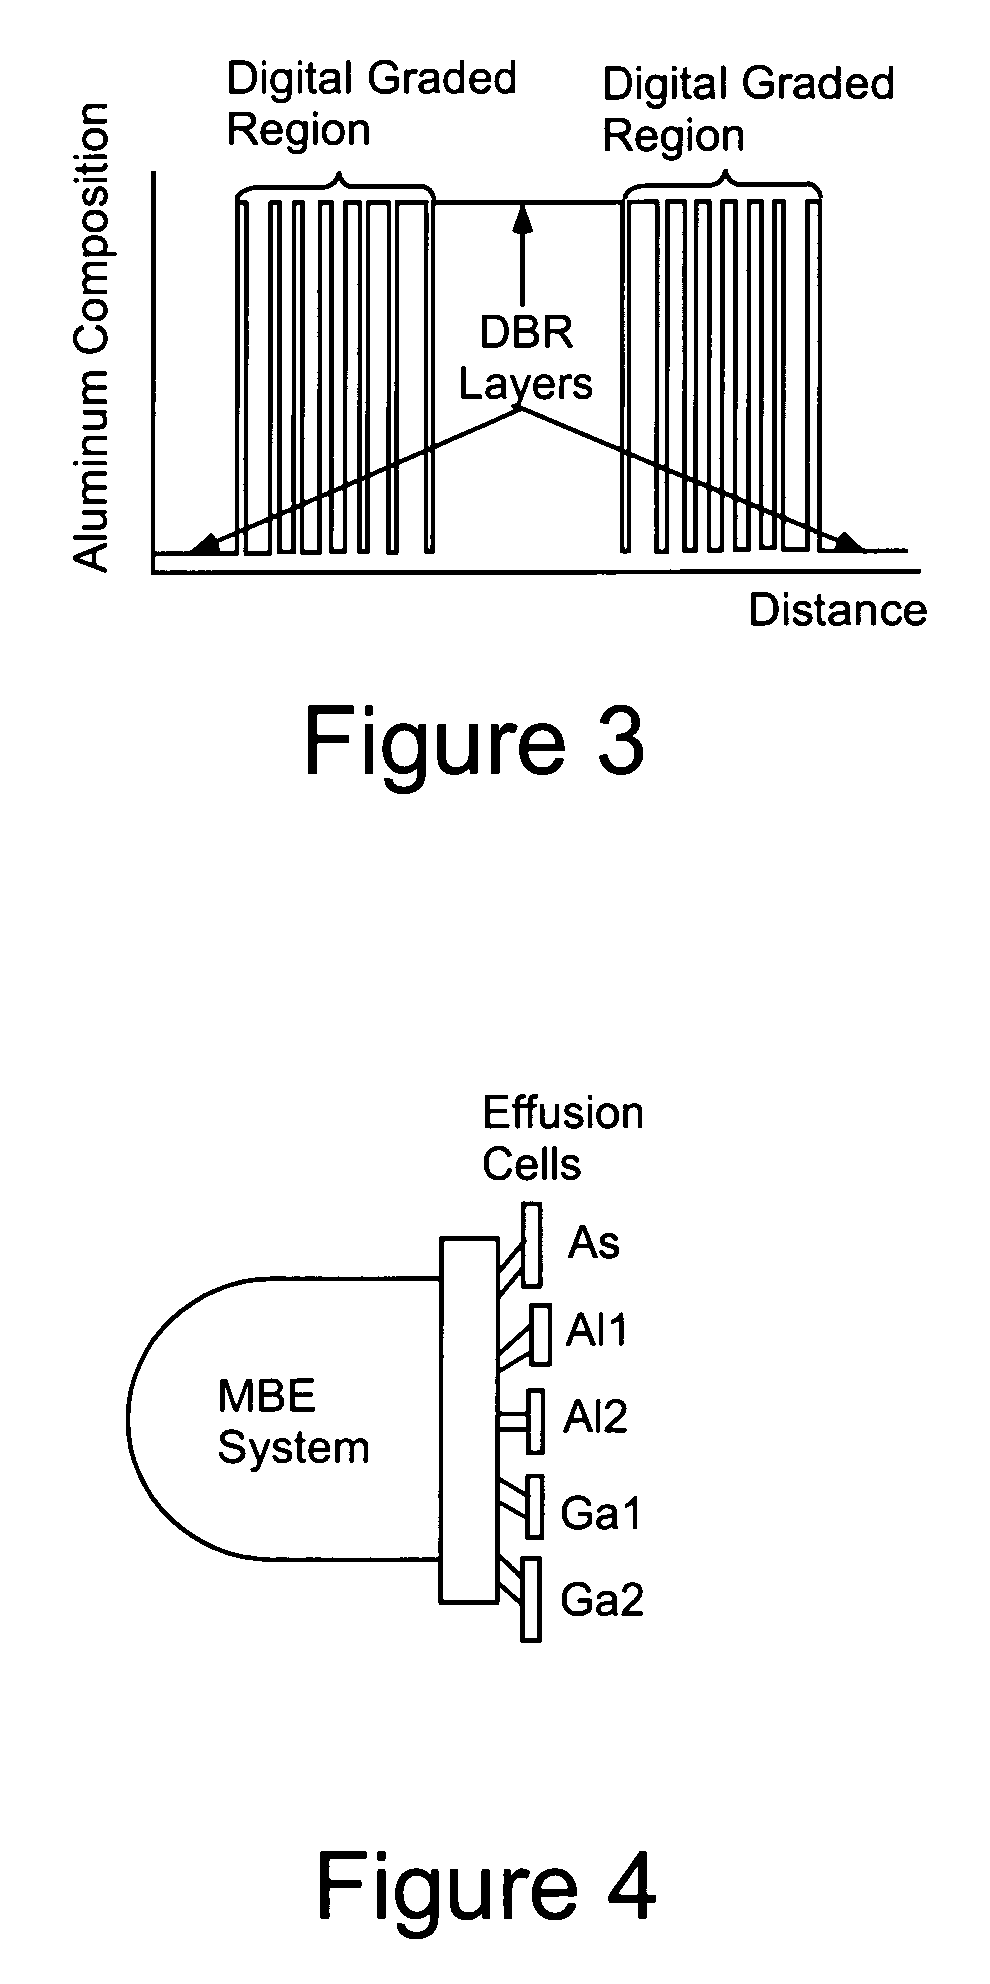 Method for semiconductor compositional grading to realize low-resistance, distributed Bragg reflectors